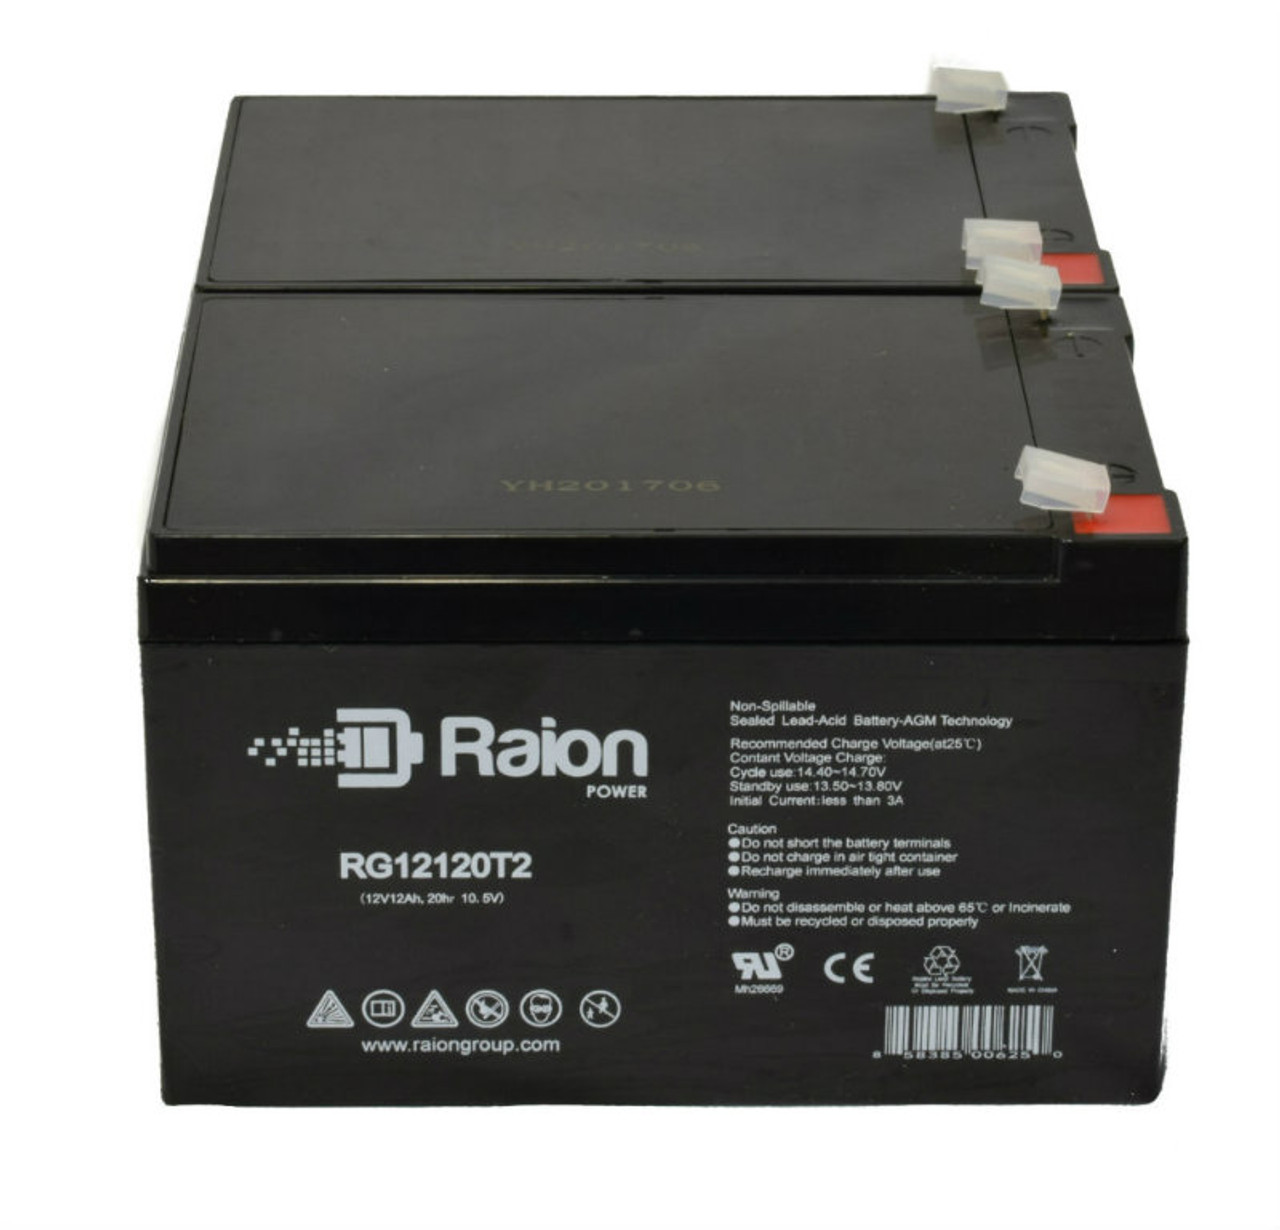 Raion Power 12V 12Ah Non-Spillable Compatible Replacement Battery for Chilwee 6-FM-14 - (2 Pack)